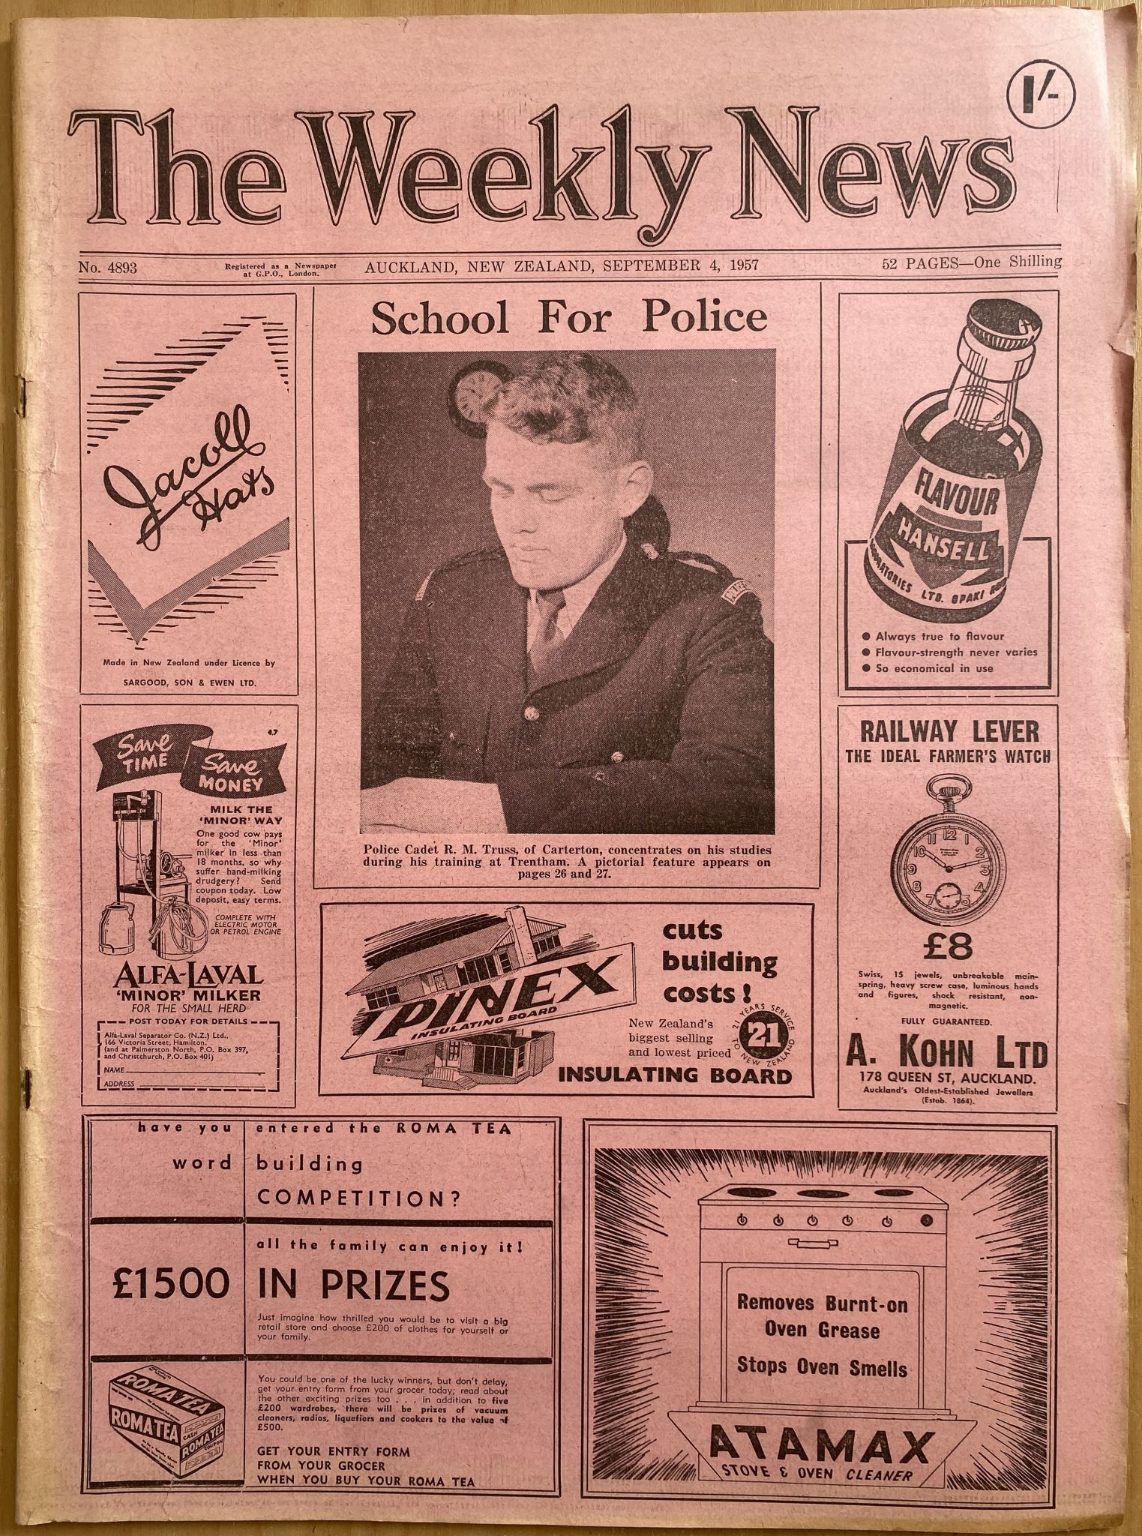 OLD NEWSPAPER: The Weekly News, No. 4893, 4 September 1957